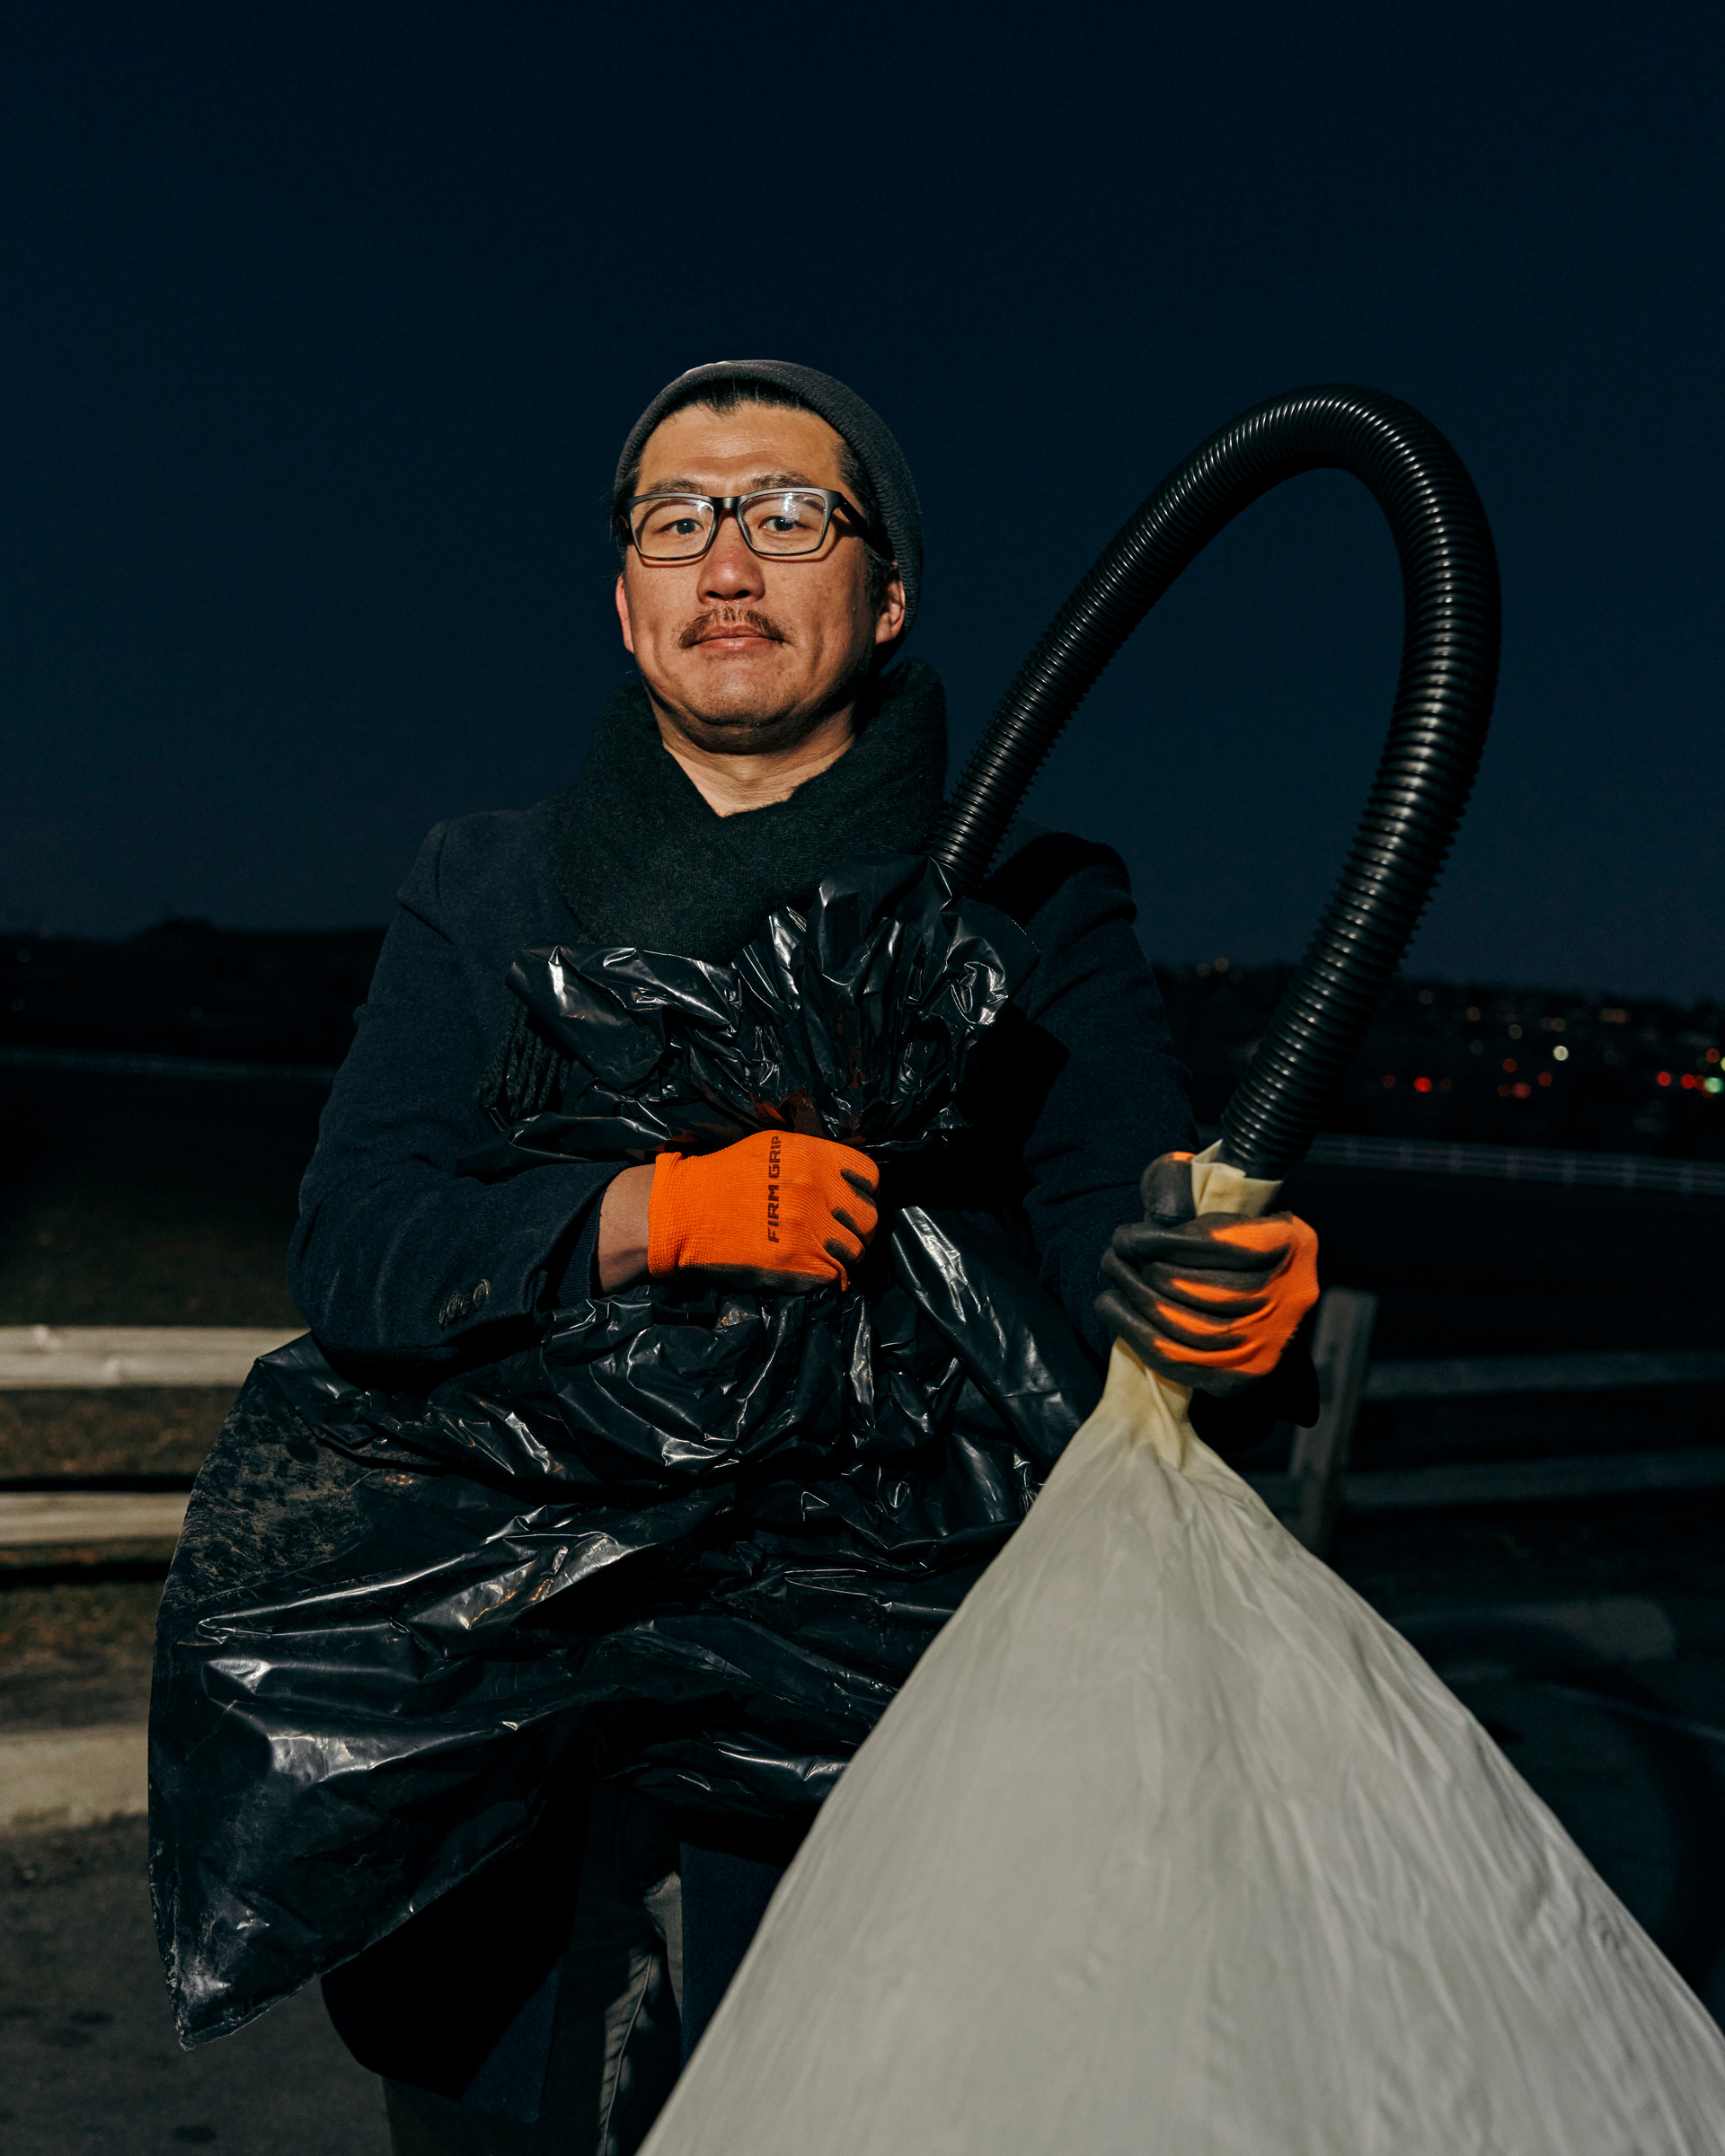 Co-founder Andrew Song of solar geoengineering startup Make Sunsets holds a weather balloon filled with helium, air and sulfur dioxide at a park in Reno, Nevada, United States on February 12, 2023.